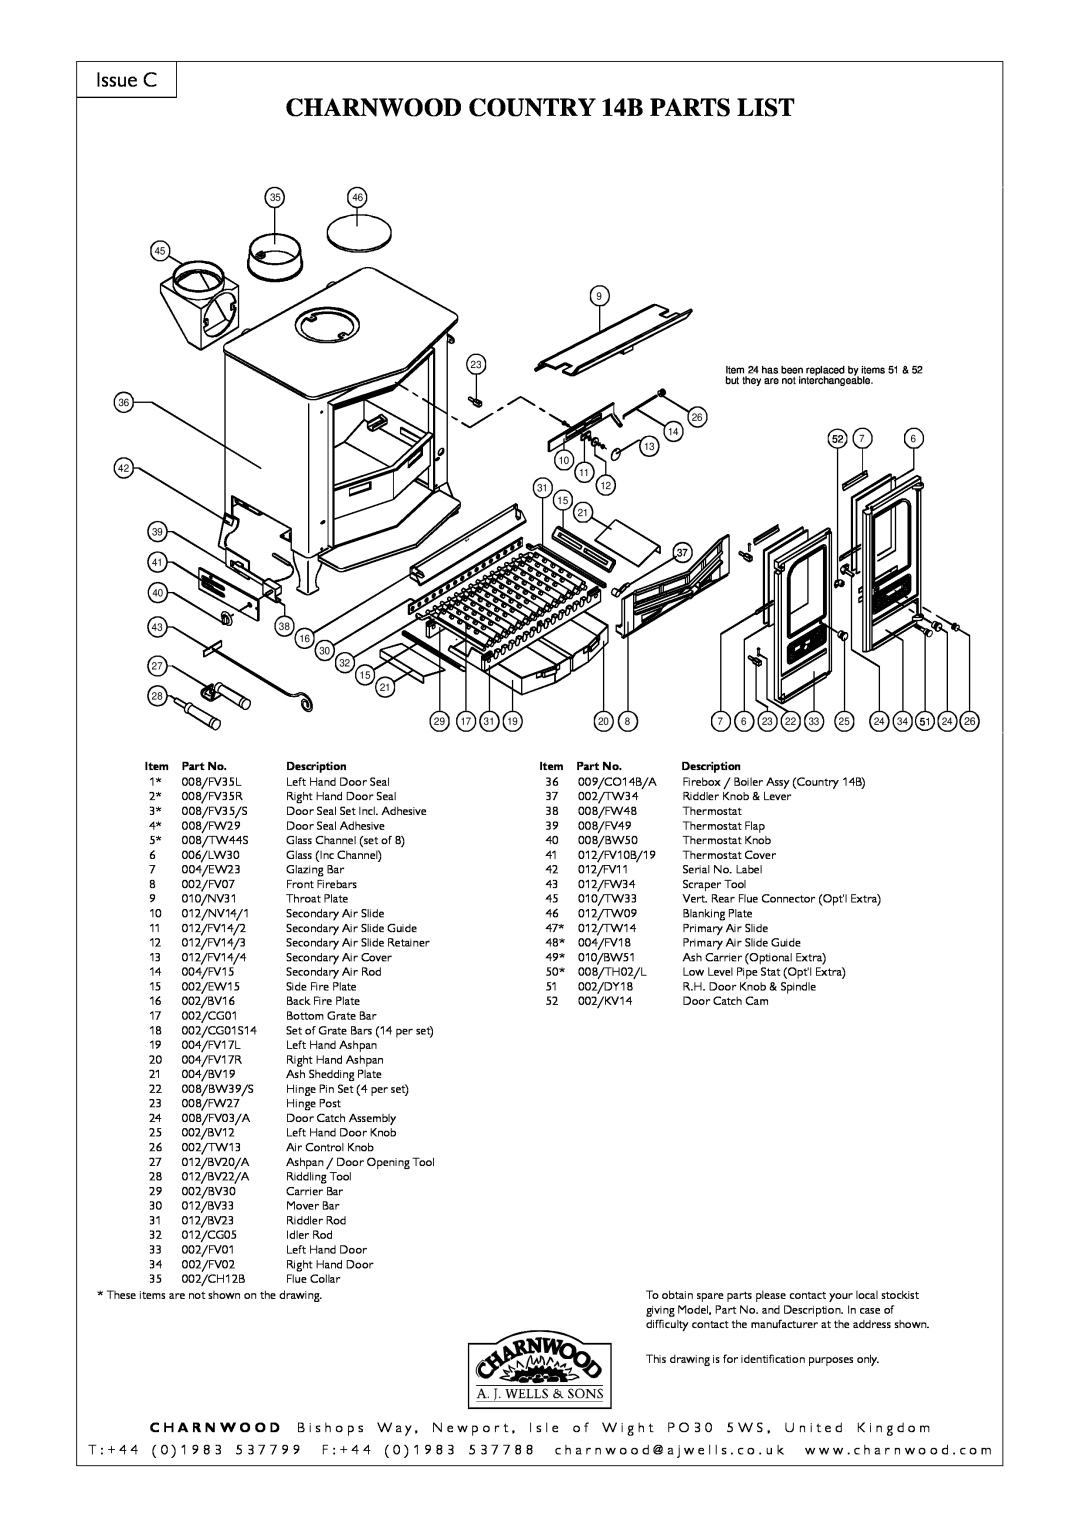 Charnwood Country 14B installation instructions CHARNWOOD COUNTRY 14B PARTS LIST, Issue C 